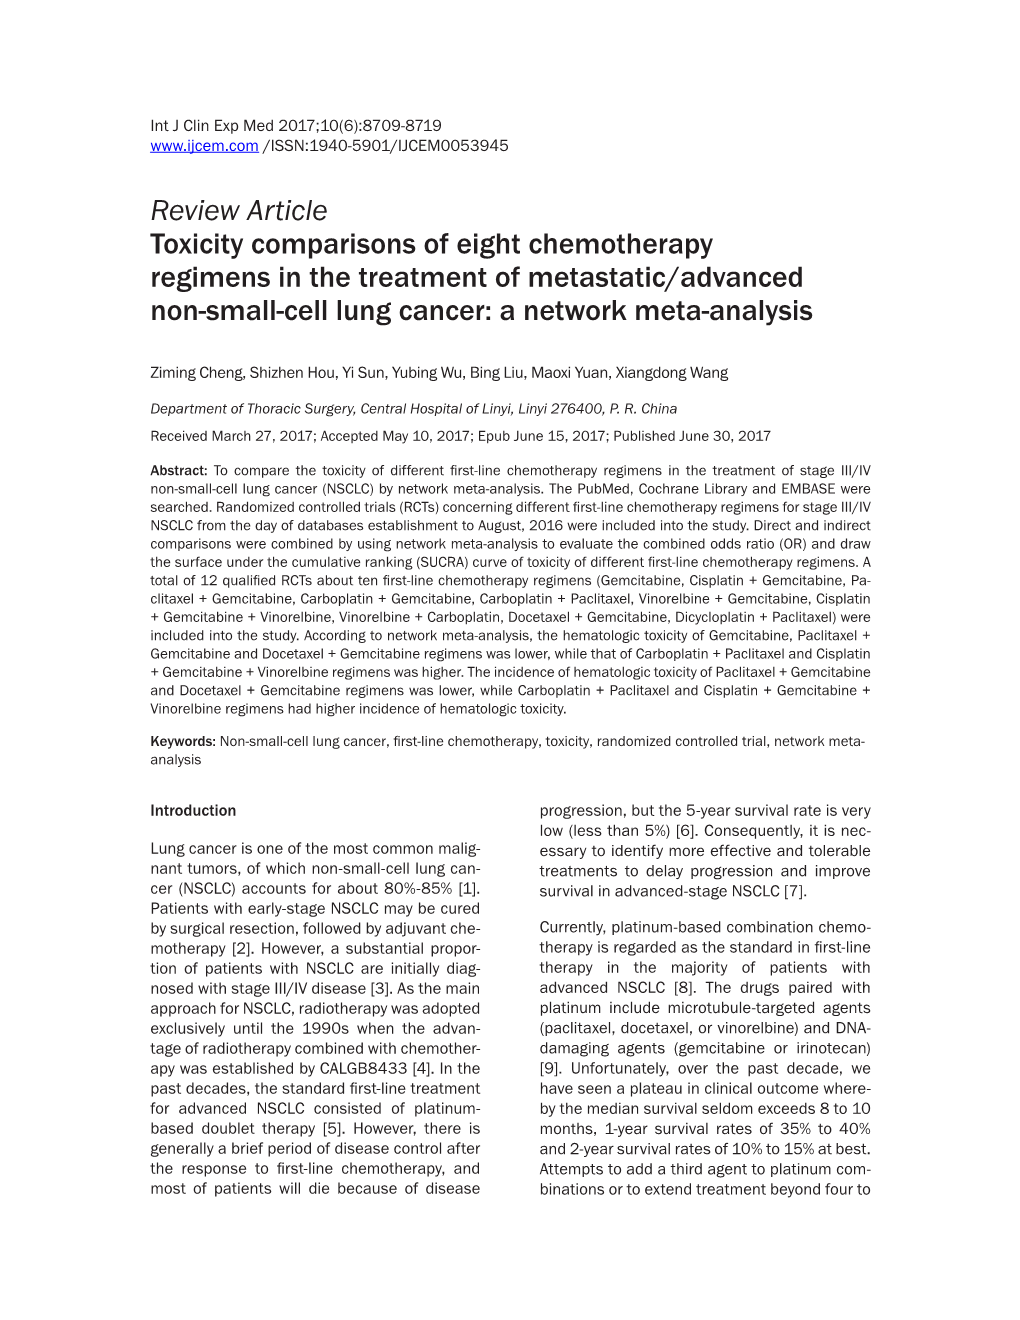 Review Article Toxicity Comparisons of Eight Chemotherapy Regimens in the Treatment of Metastatic/Advanced Non-Small-Cell Lung Cancer: a Network Meta-Analysis